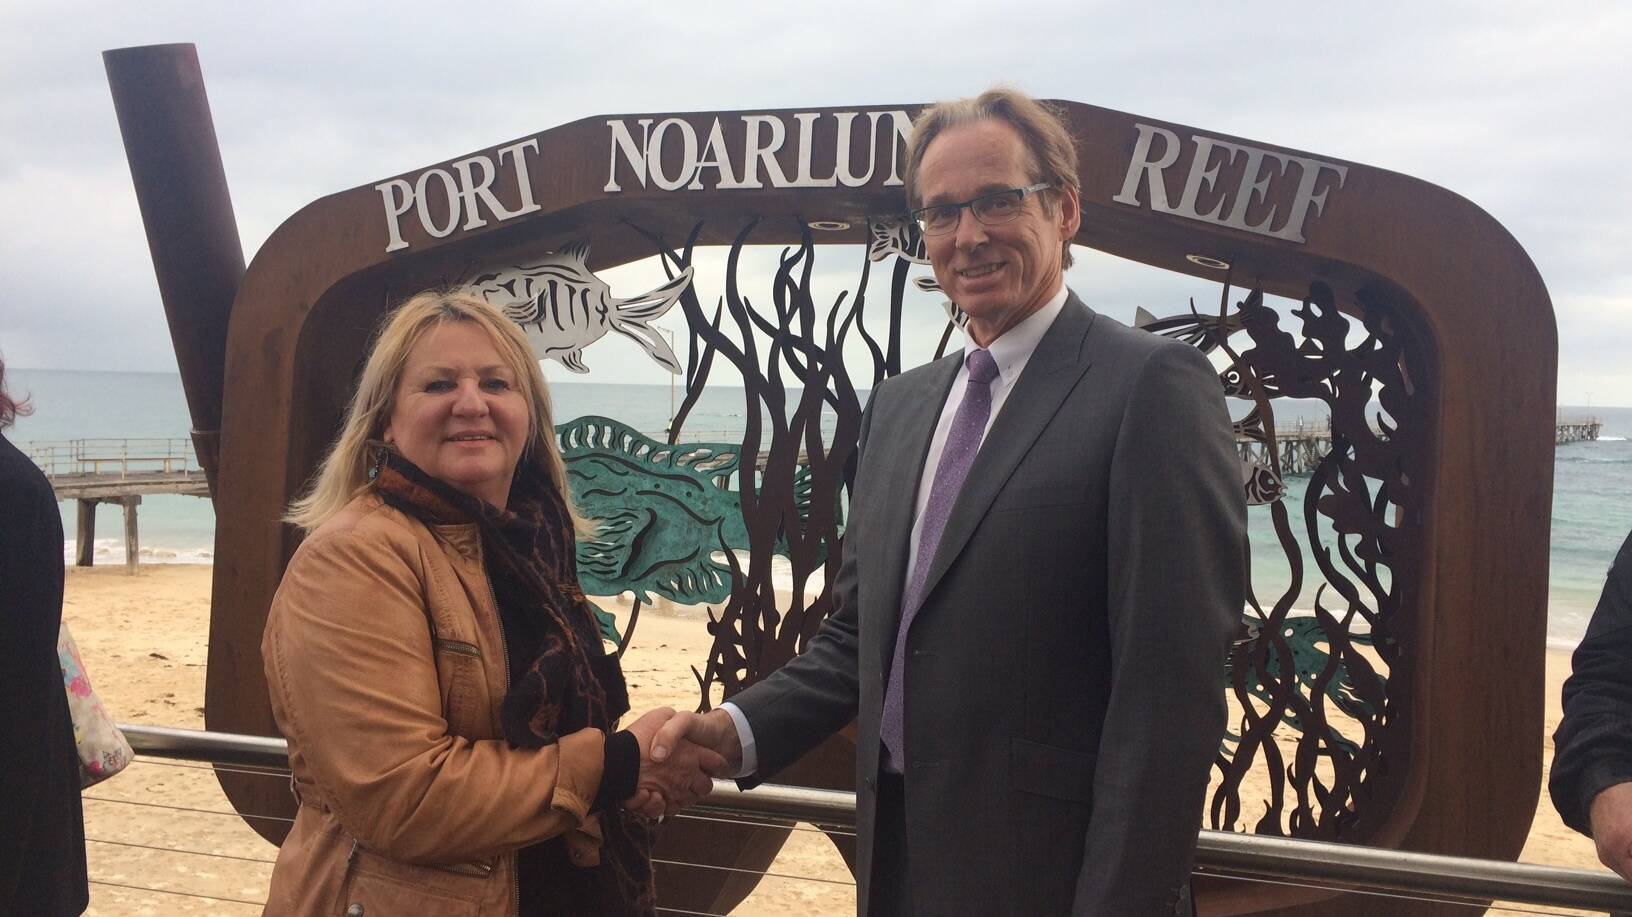 Image Photo— Jeanette Howell, Chairwoman, Port Noarlunga Business & Tourism Association and ExxonMobil’s Mark Davey celebrate the launch of the public art project.